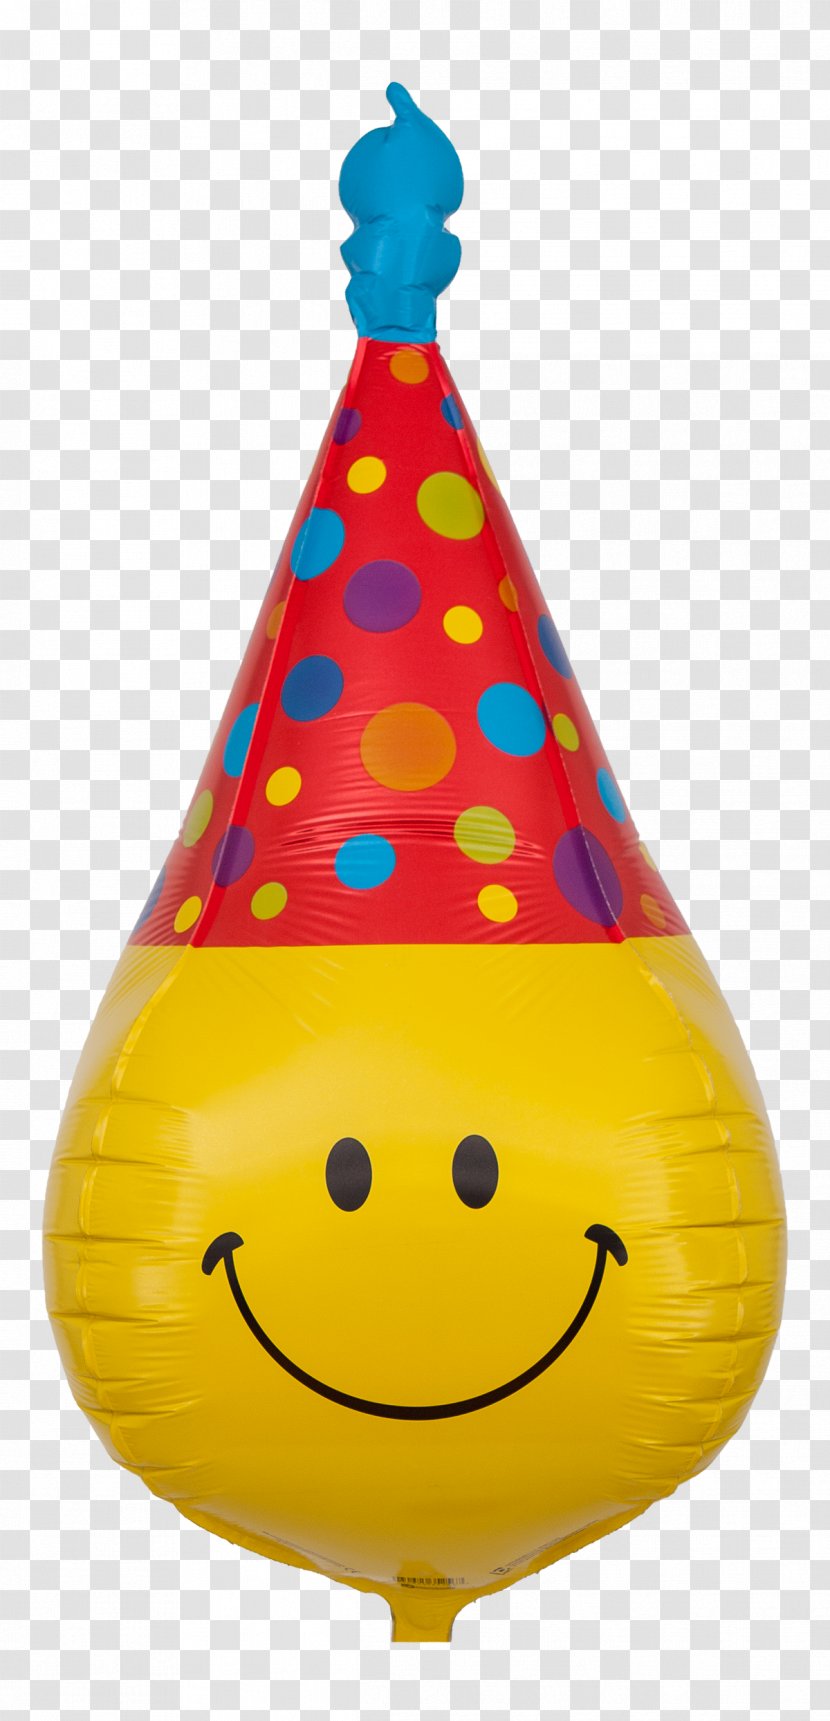 Party Hat Birthday Gift Balloon - Yellow Transparent PNG